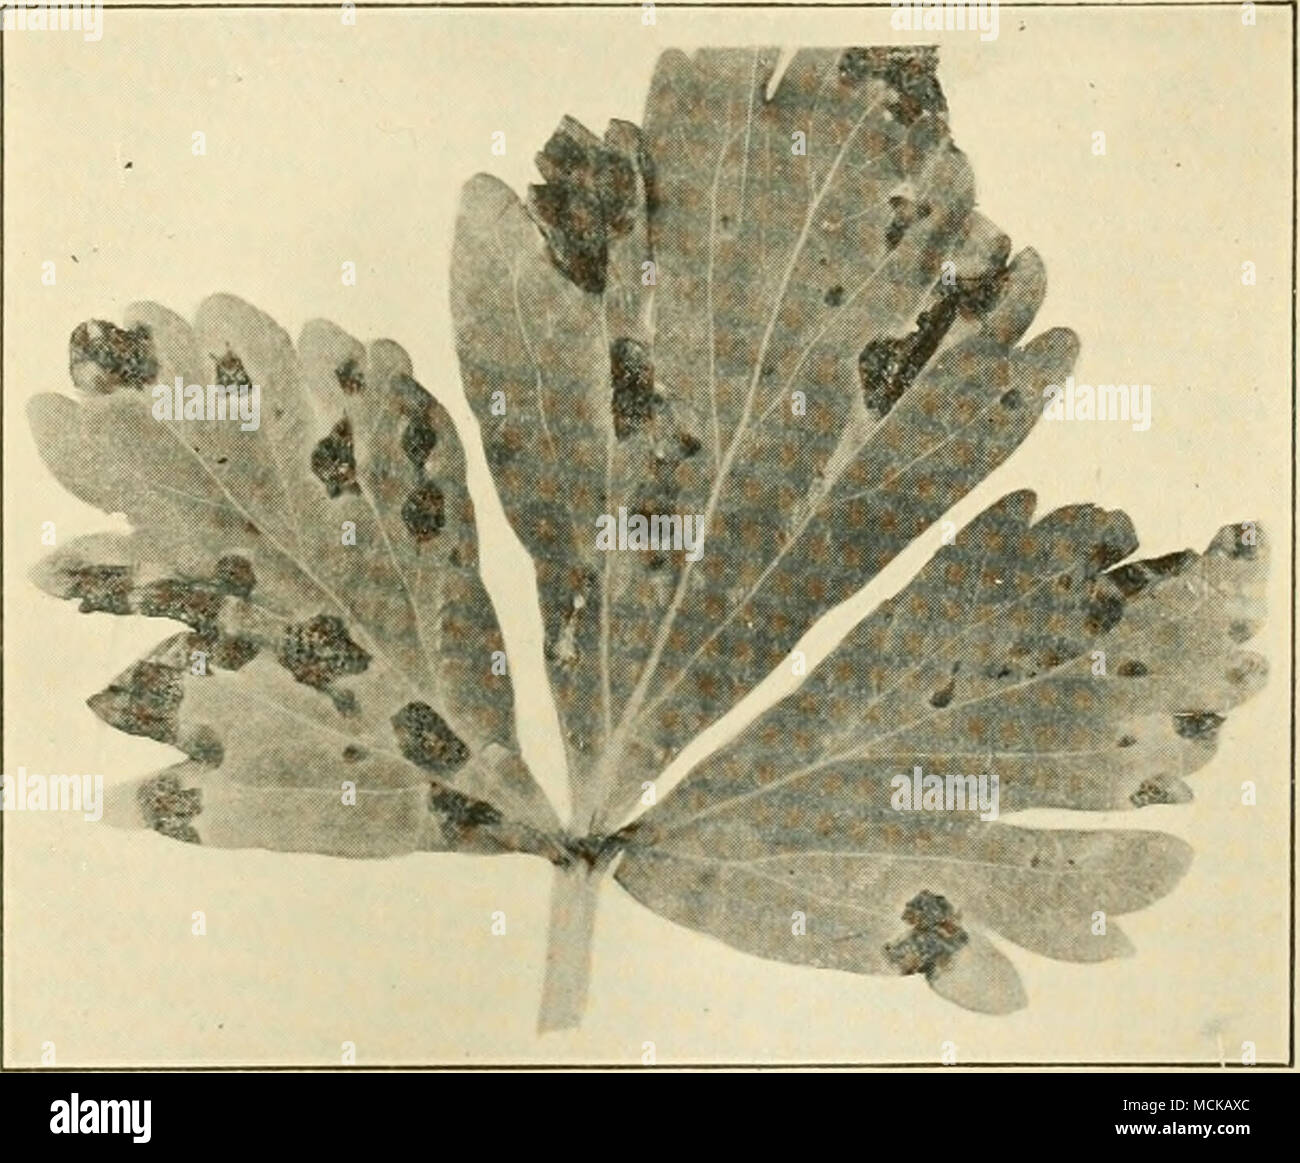 . Fig. 95. — Celery leaf infected with Septoria. After Coons. blanched petioles. In extreme cases wilting of the leaves and destruction of the plant follows. After the celery is put in storage the disease may still progress and do great damage, rotting off the leaves and forcing early marketing. Late- blight is often found in the seed bed, and is probably carried by the seed, since the pycnidia are abundant upon the seed- ing stalks and fruit. Seeds should be disinfected and the seed bed rotated. If the disease has been troublesome in preceding years, the Stock Photo